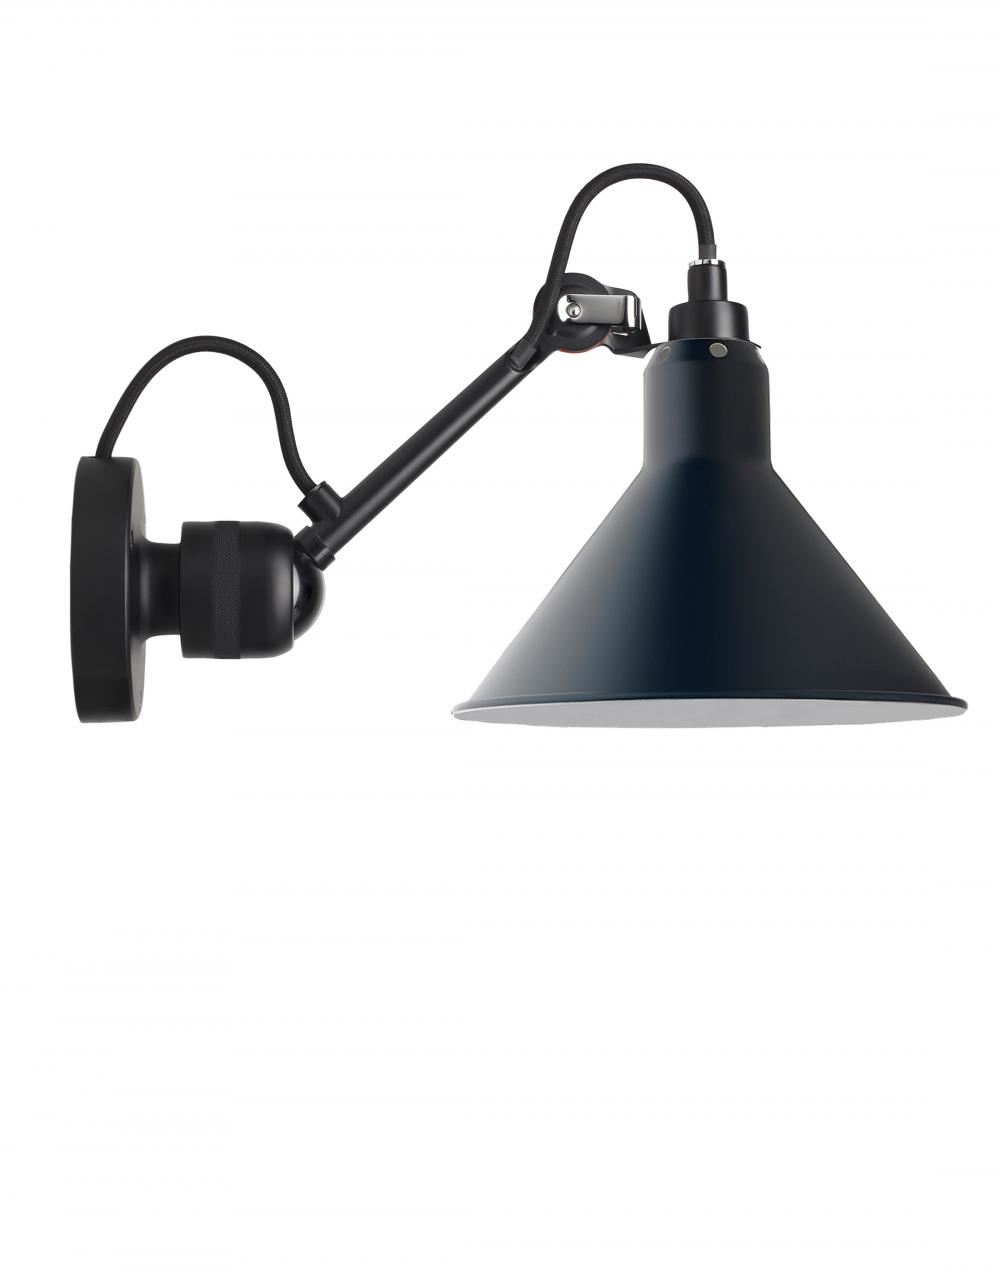 Lampe Gras 304 Small Wall Light Black Arm Blue Shade Conic Hardwired